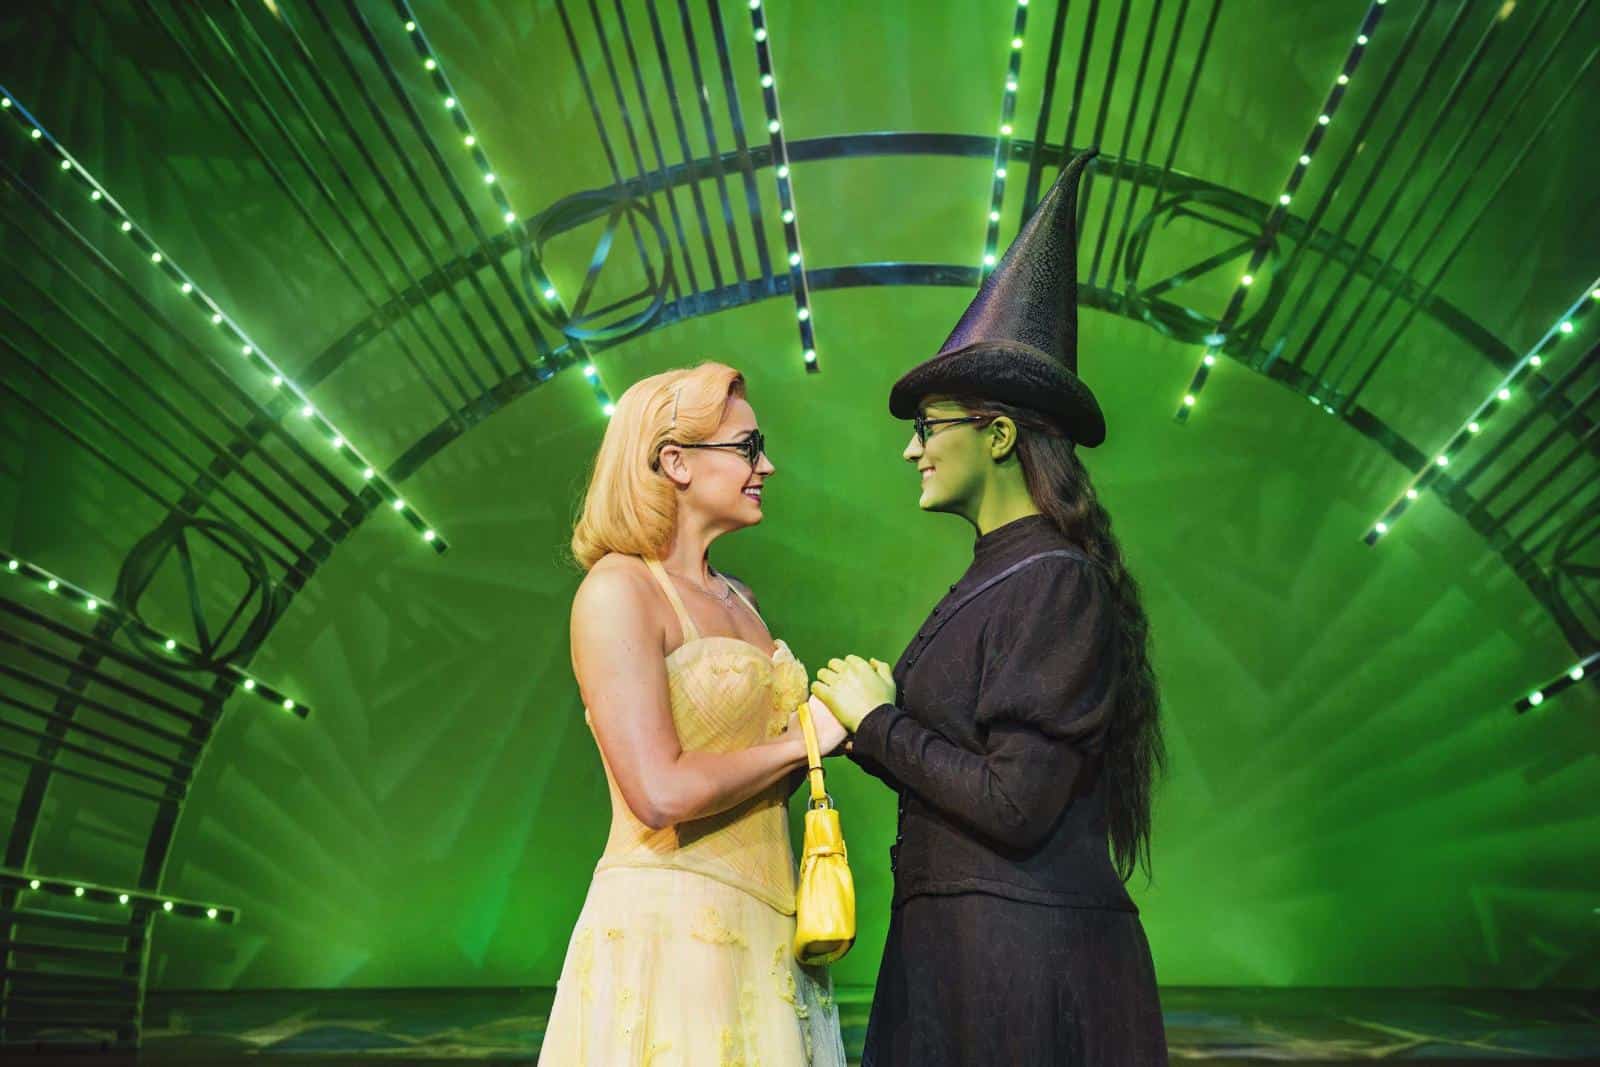 Glinda and Elphaba holding hands, smiling, and facing each other in the Emerald City